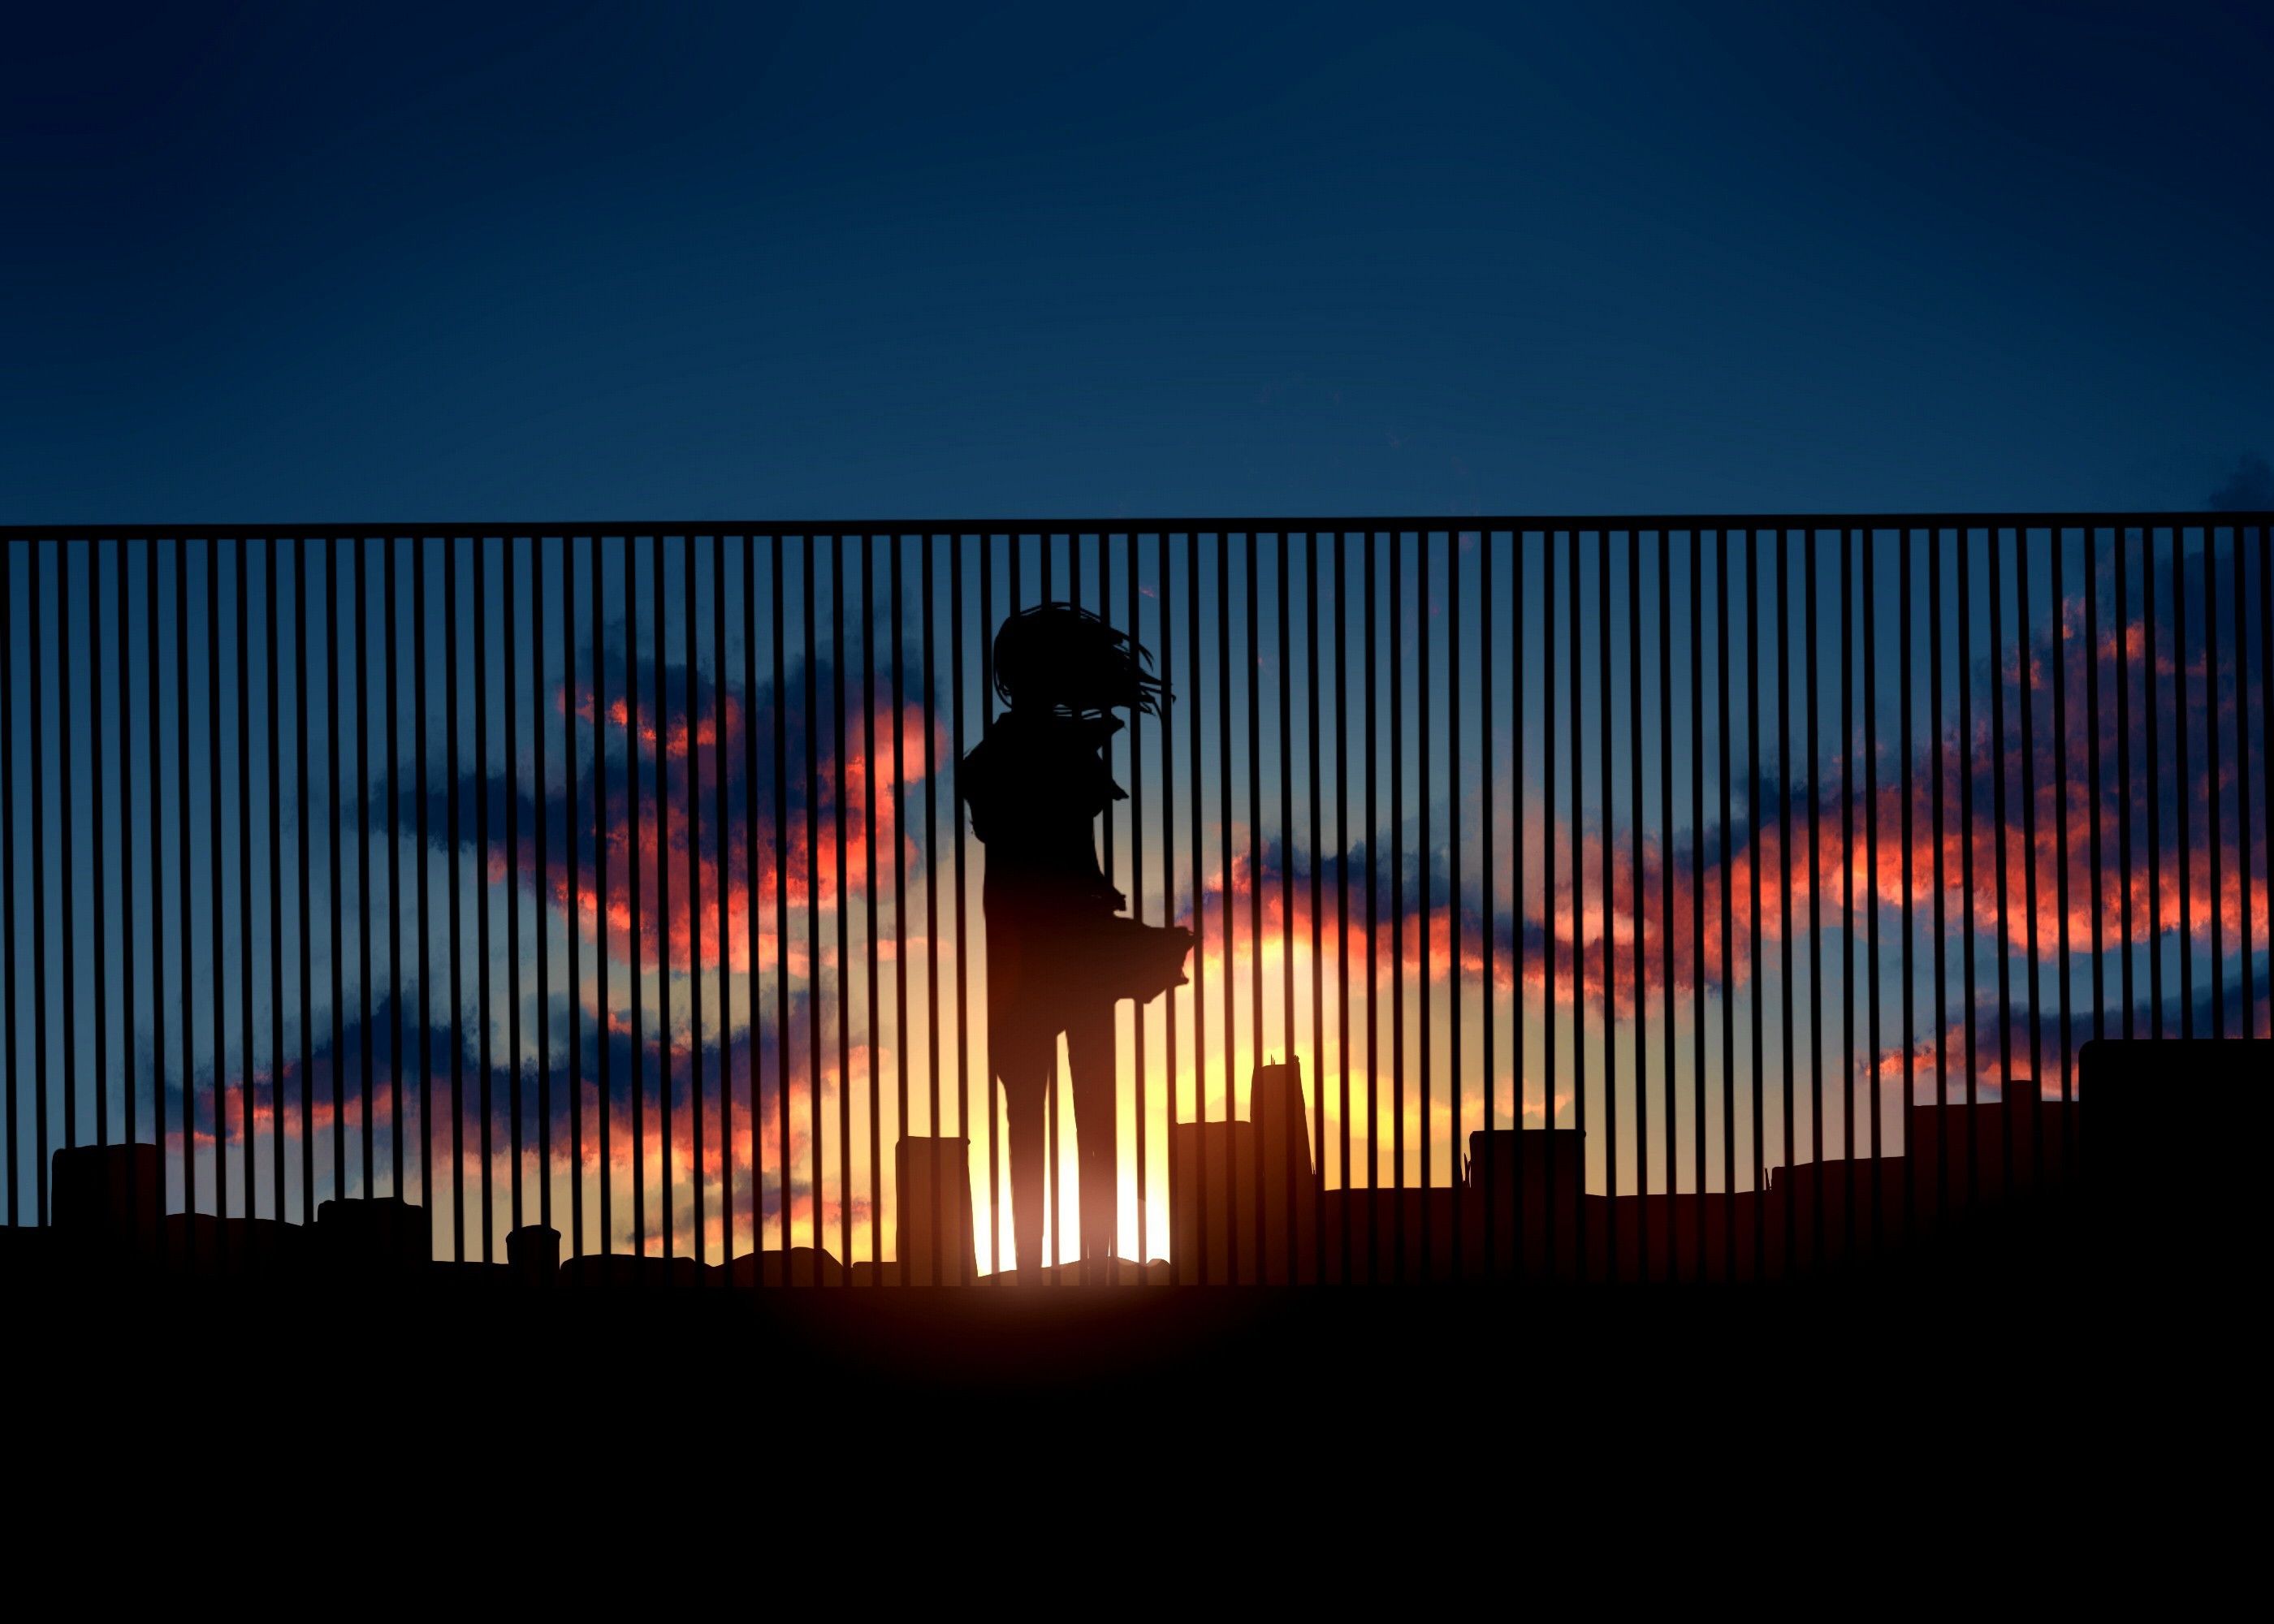 Anime style wallpaper. Girl looking at the peaceful sunset. (2800x2000)